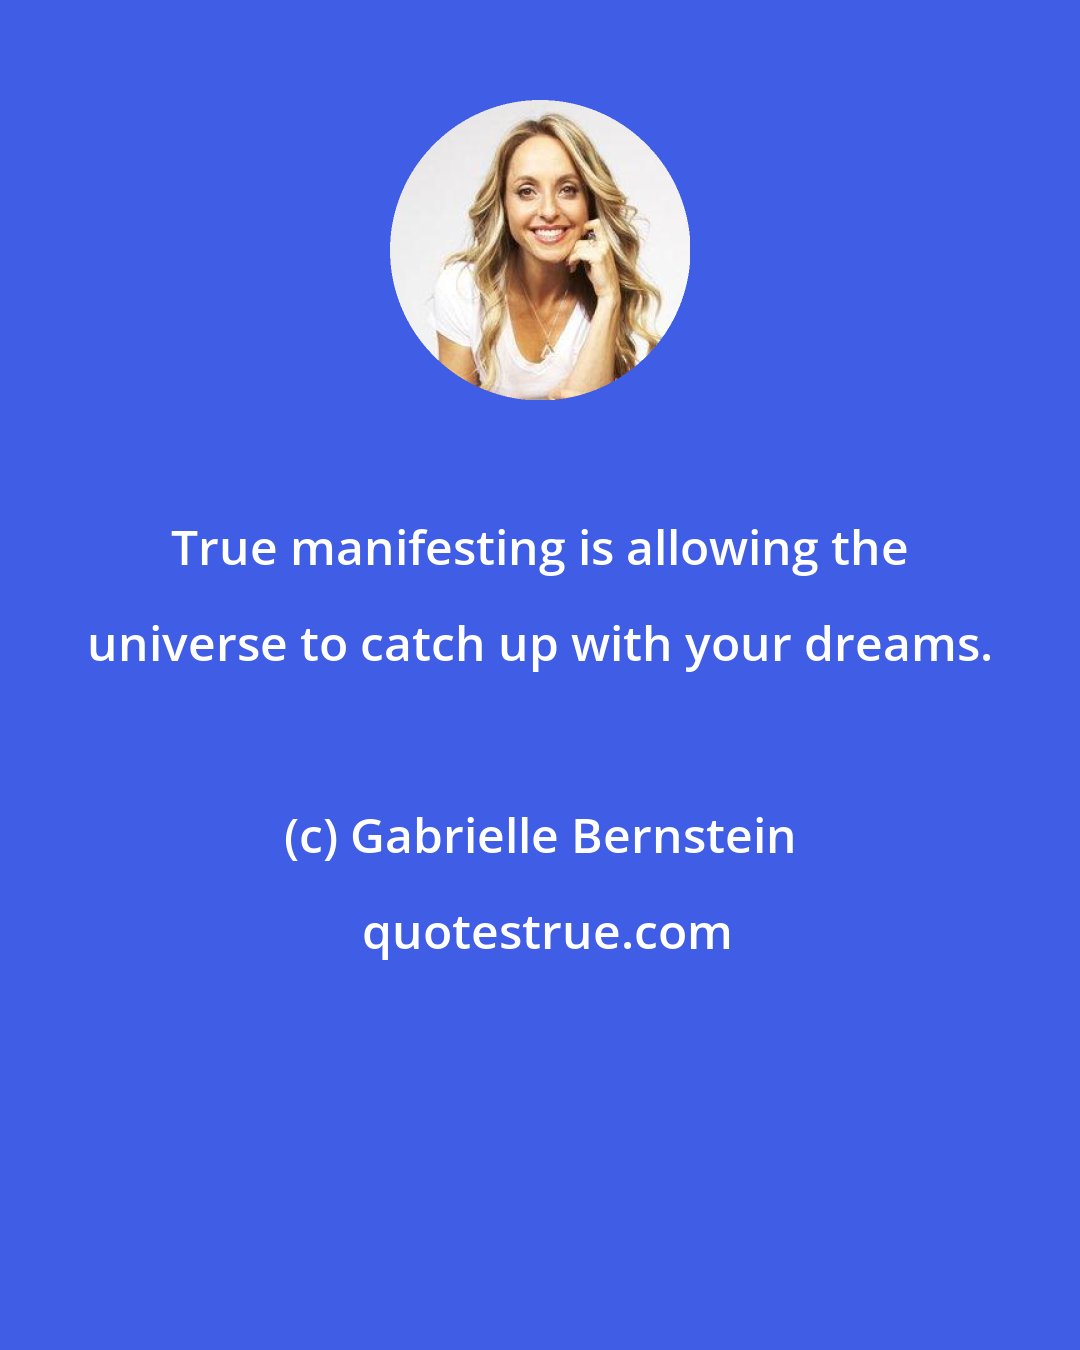 Gabrielle Bernstein: True manifesting is allowing the universe to catch up with your dreams.